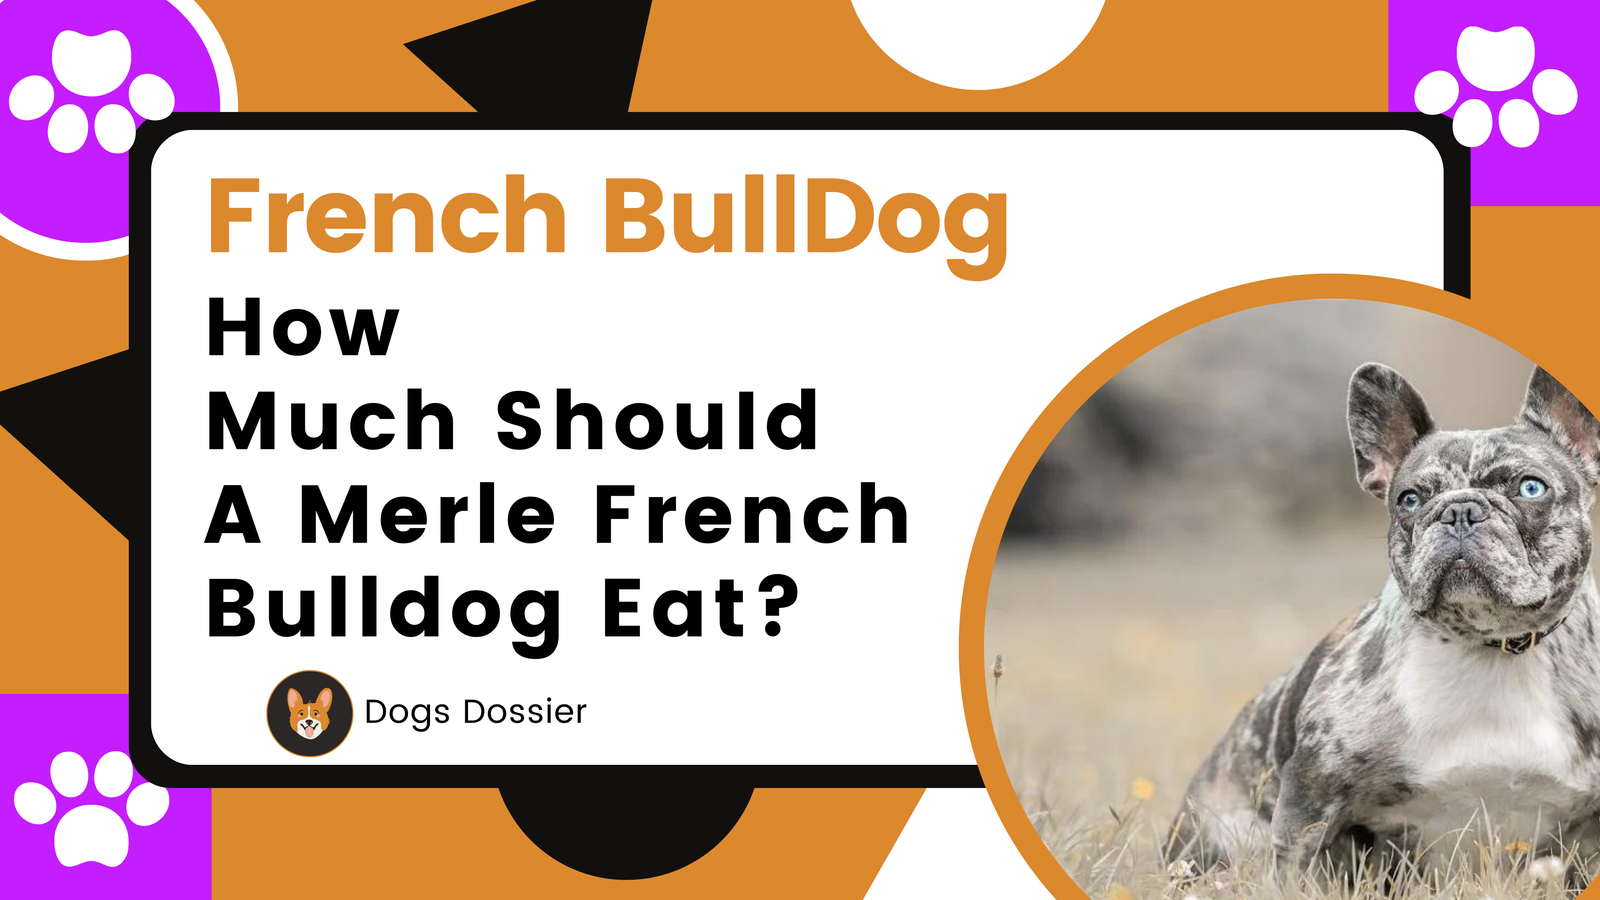 How much should a Merle French Bulldog Eat?